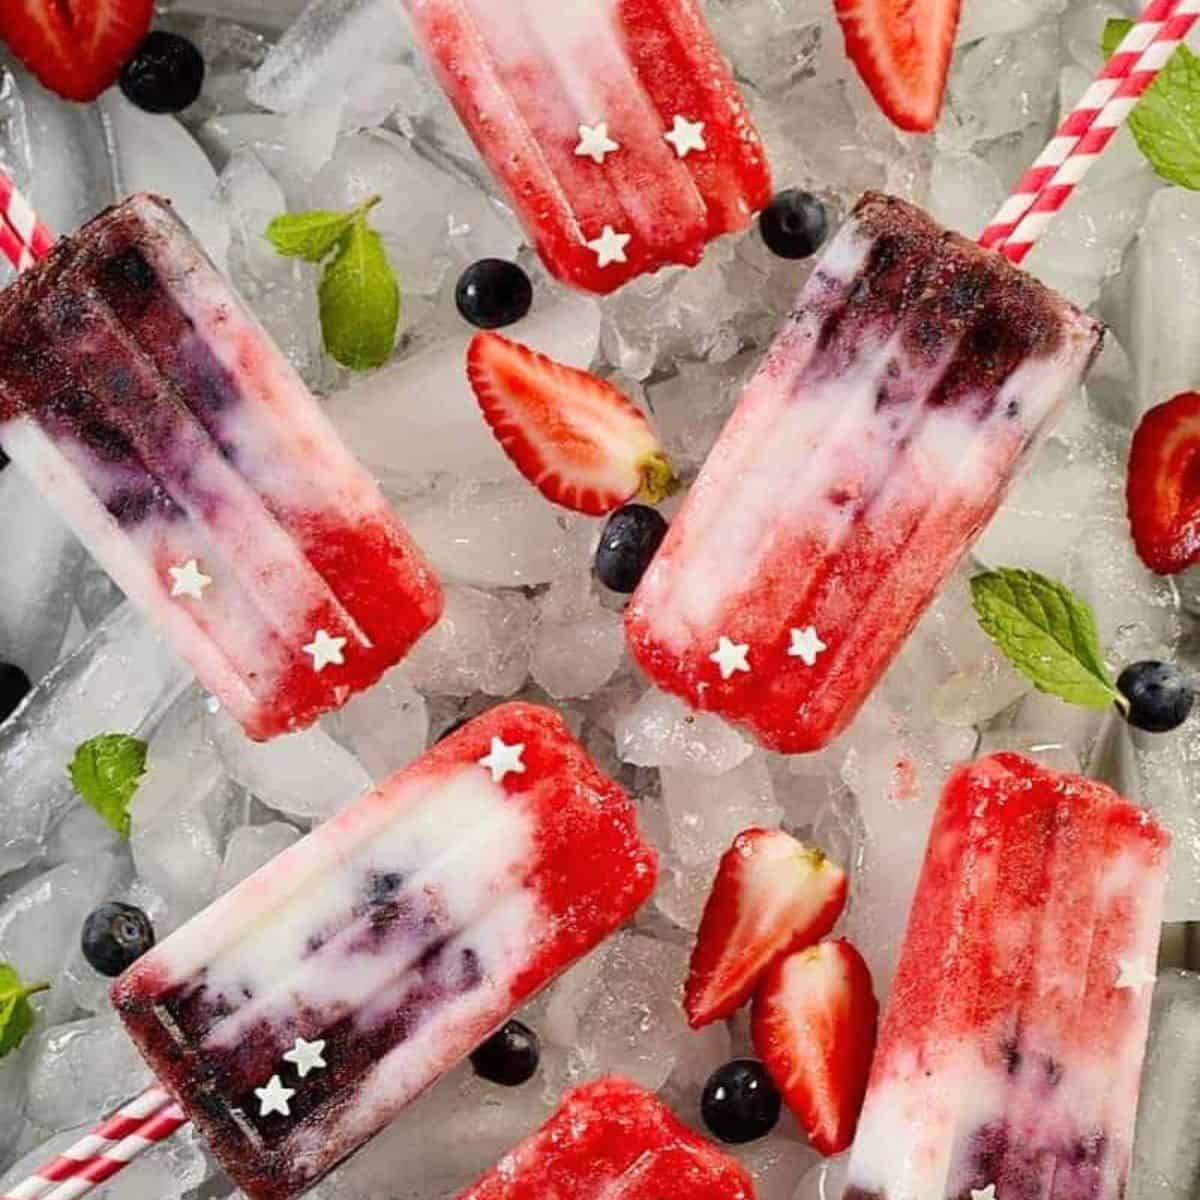 Several red, white, and blue berry yogurt ice pops on ice cubes with some scattered ingredients around them.